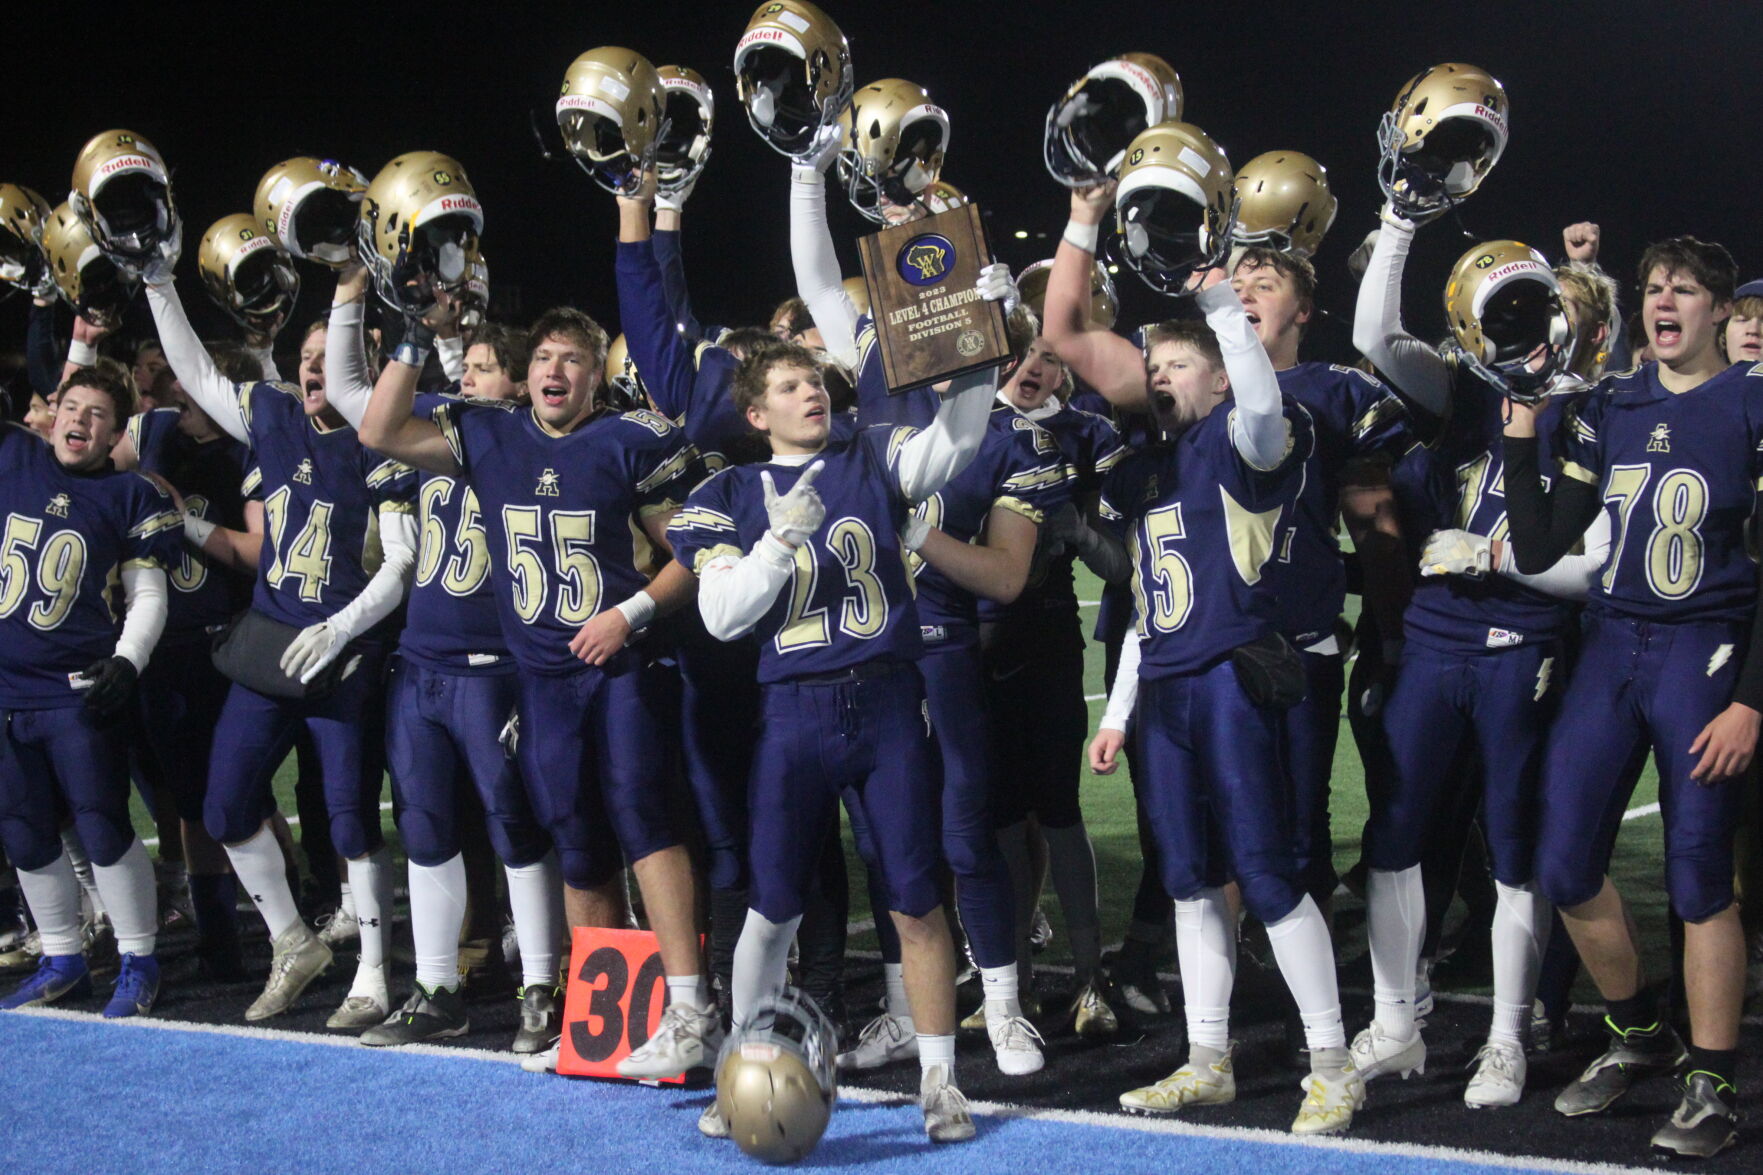 Aquinas High School Football Team Clinches Third-Straight State Division 5 Title Game | Shane Willenbring Shares Reflection on Team’s Unexpected Success | David Malin Scores Three Touchdowns